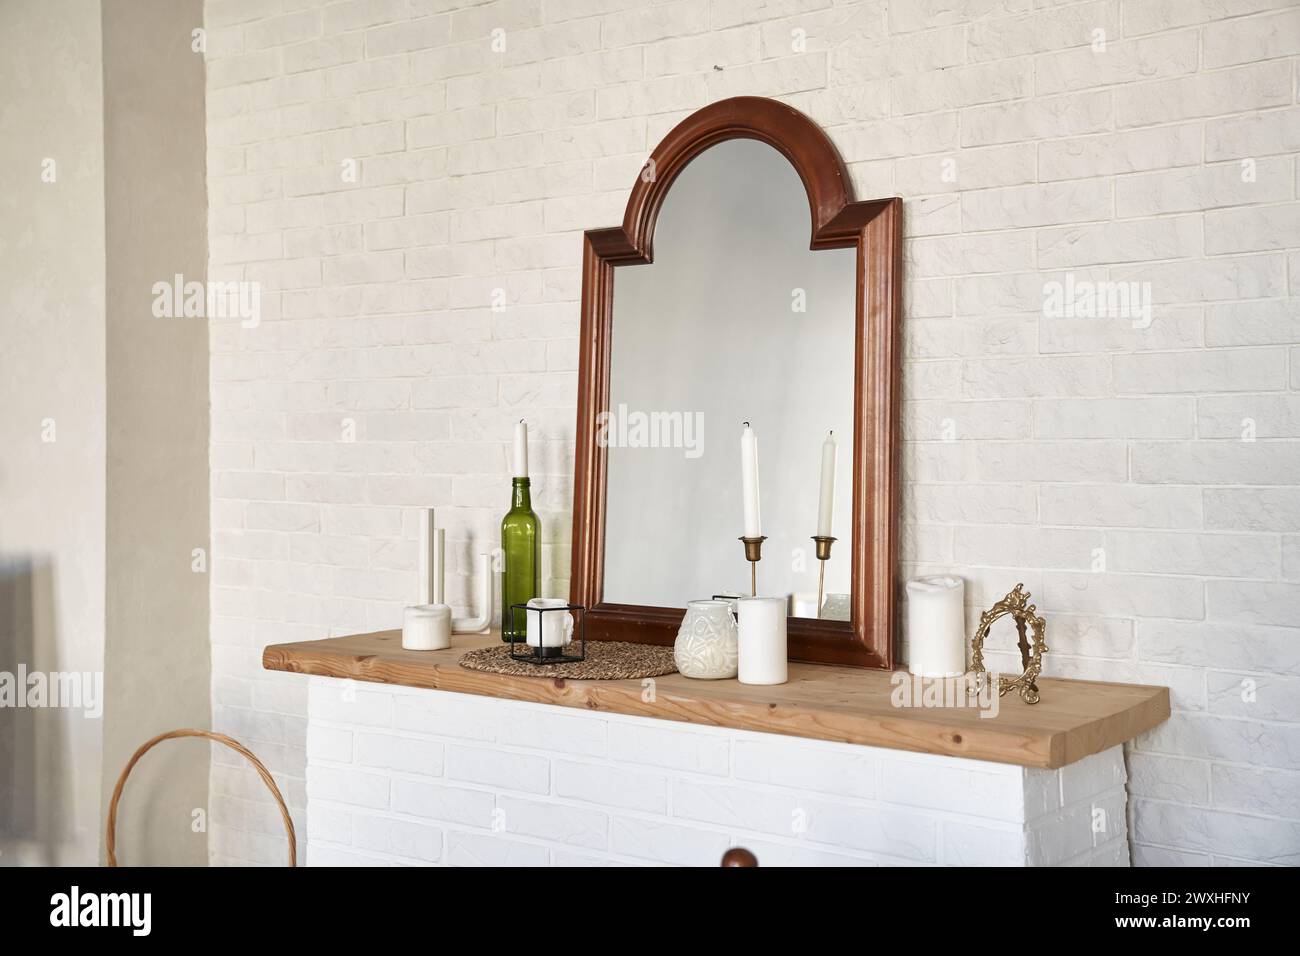 Interior design of bright room with vintage mirrow standing on top of fireplace, candles, white brick wall. Background with copy space, empty. Template, mockup for design, poster, art, object. Stock Photo